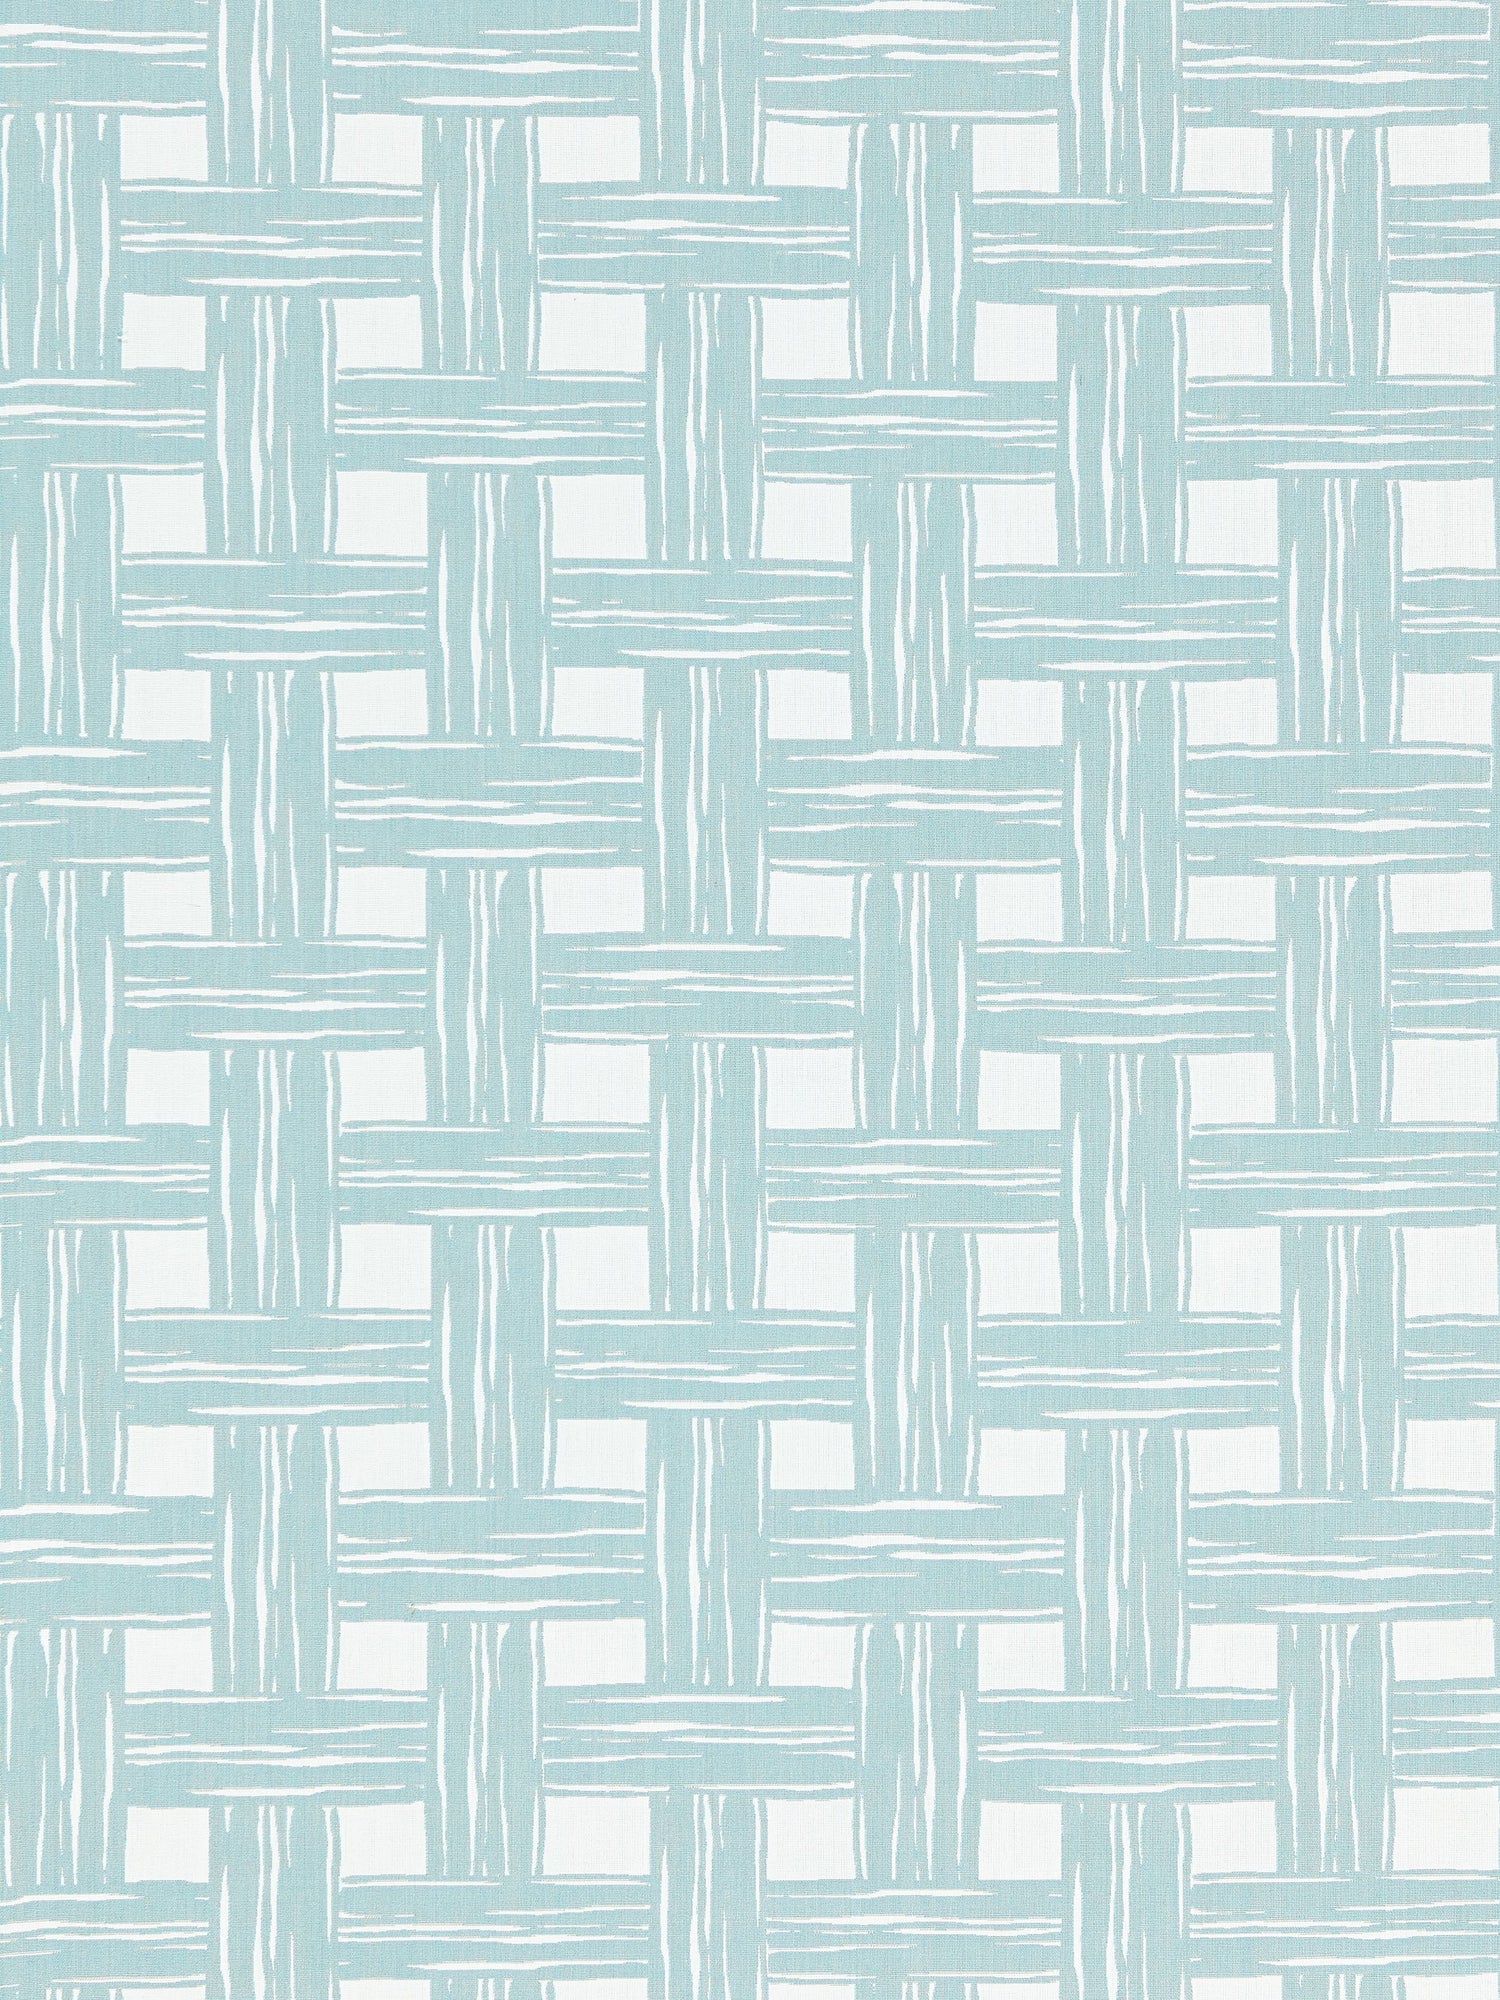 Bamboo Lattice fabric in surf color - pattern number SC 000227059 - by Scalamandre in the Scalamandre Fabrics Book 1 collection